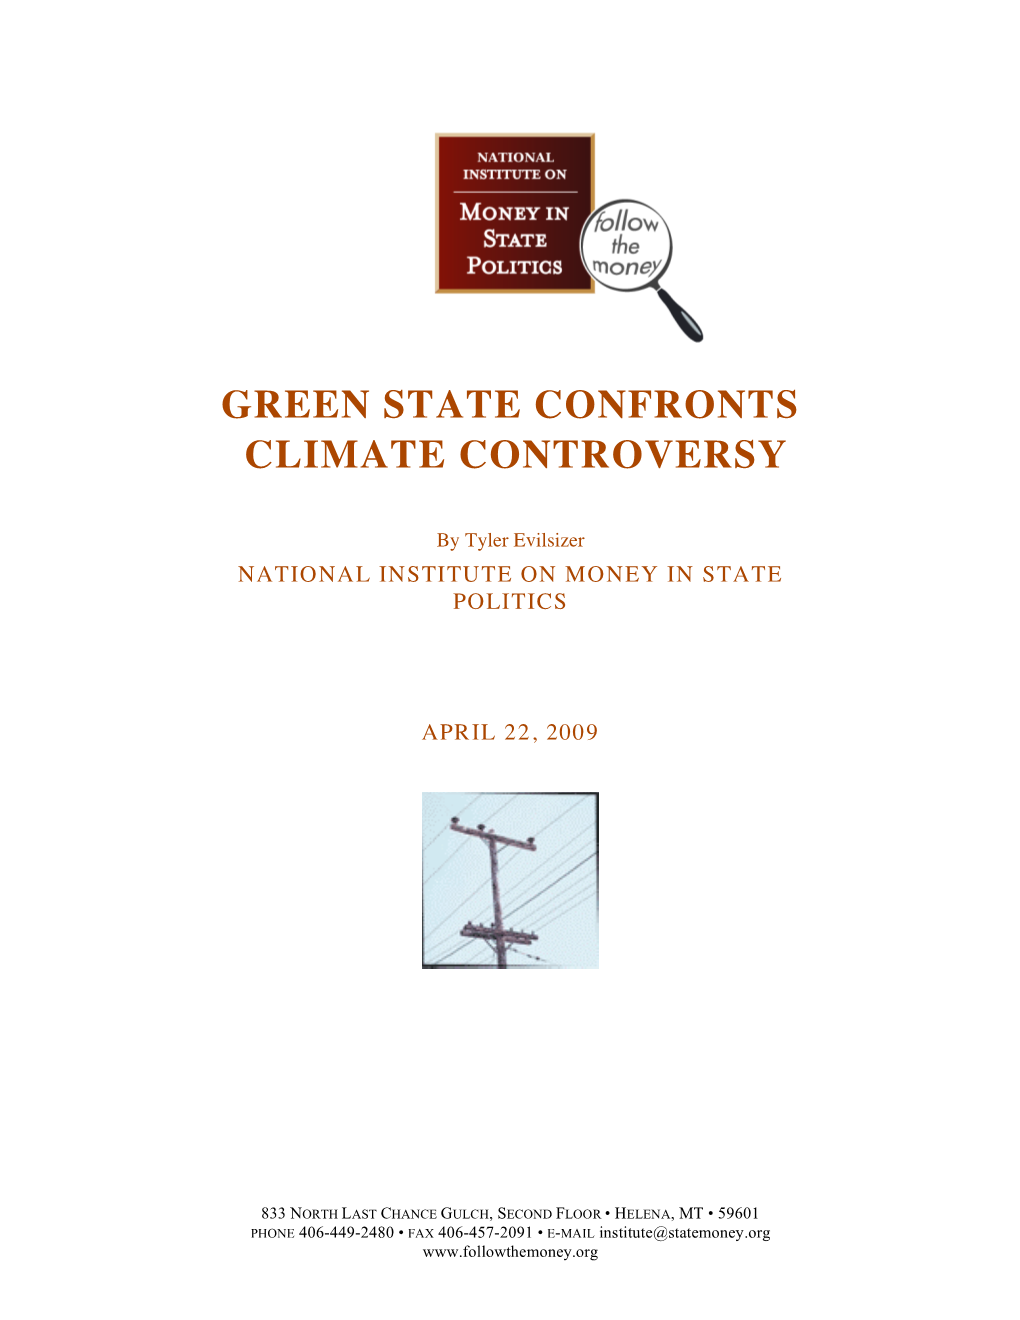 Green State Confronts Climate Controversy